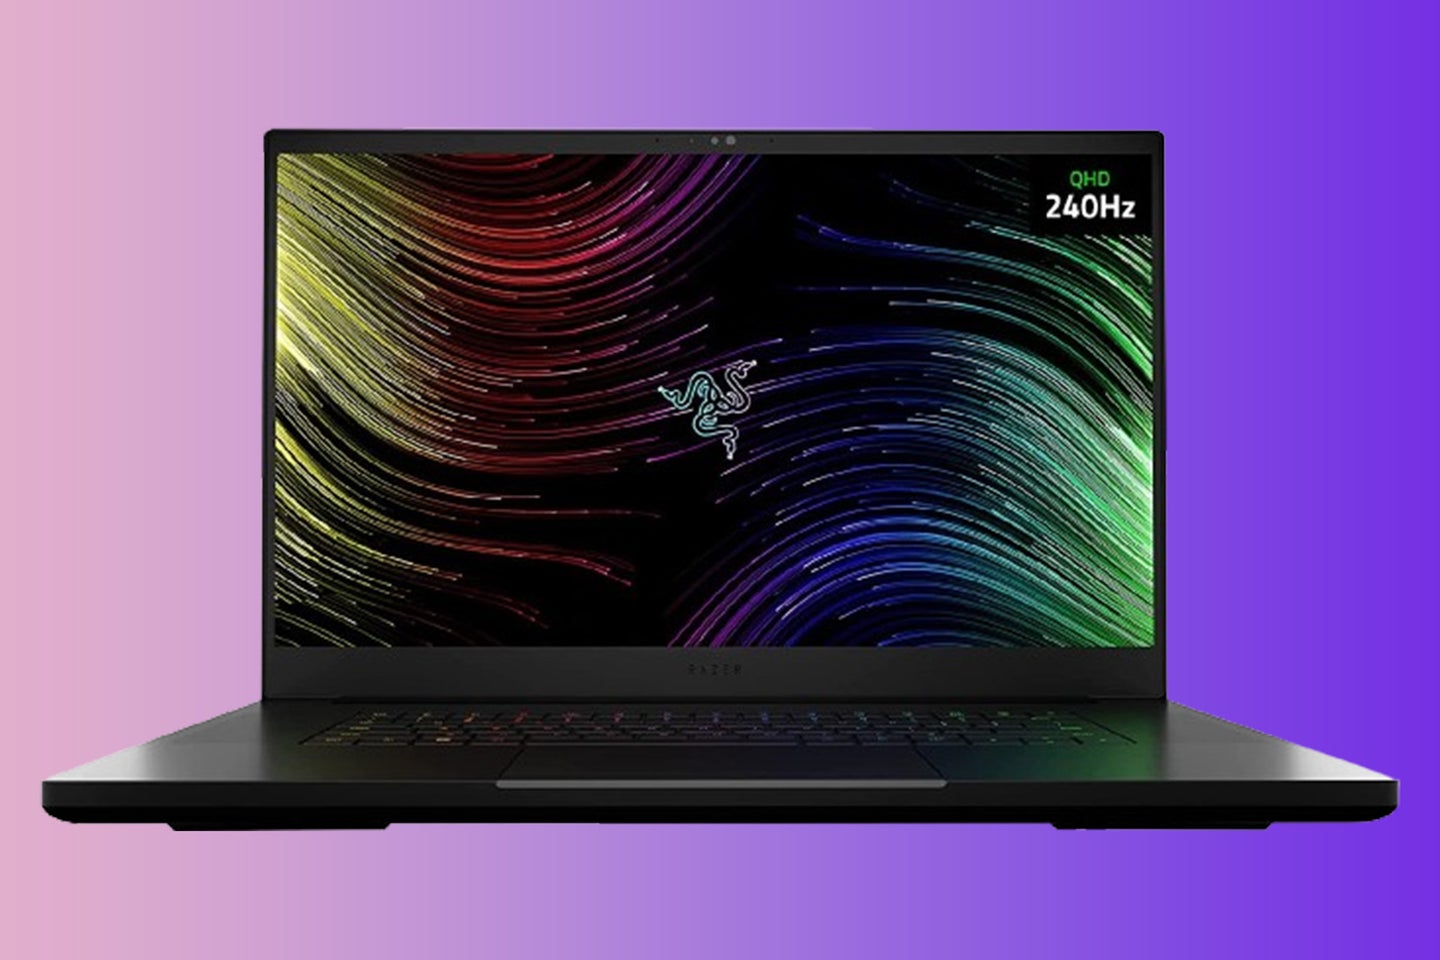 A Razer gaming laptop on a purple gradient background